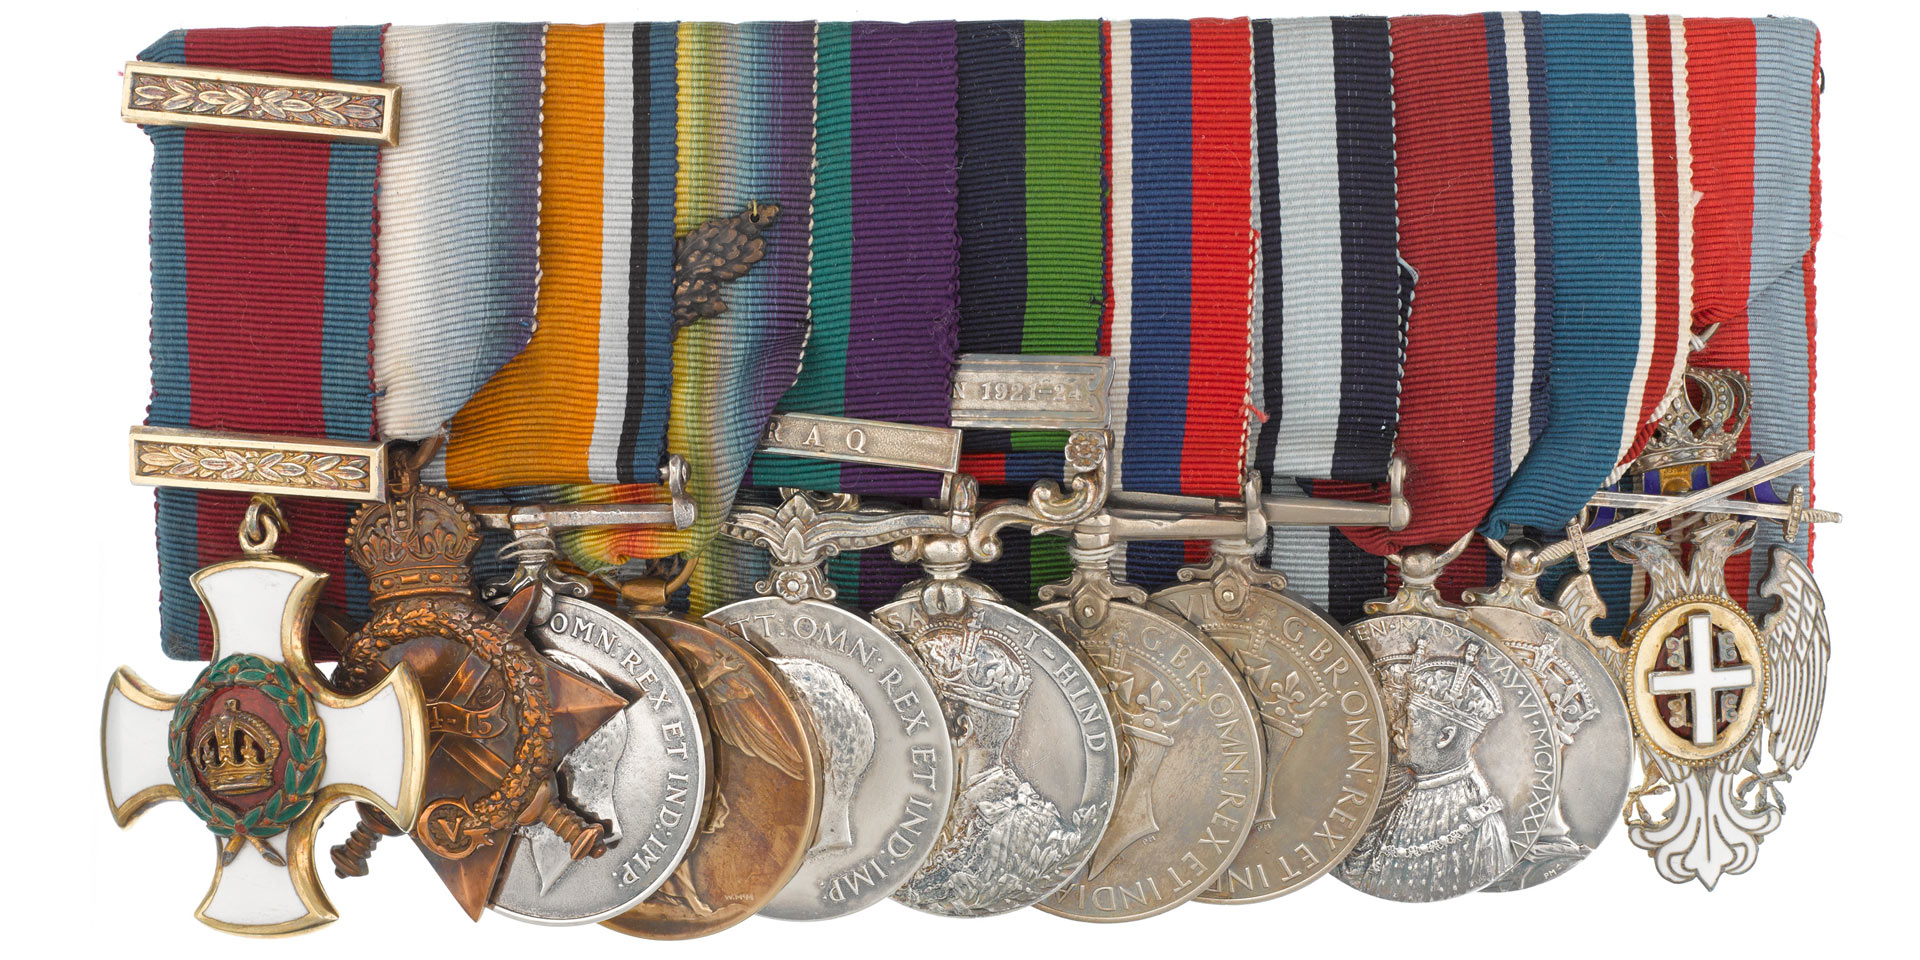 Distinguished Service Order (left) and campaign medals awarded to Captain Heerajee Cursetjee, 1914-46